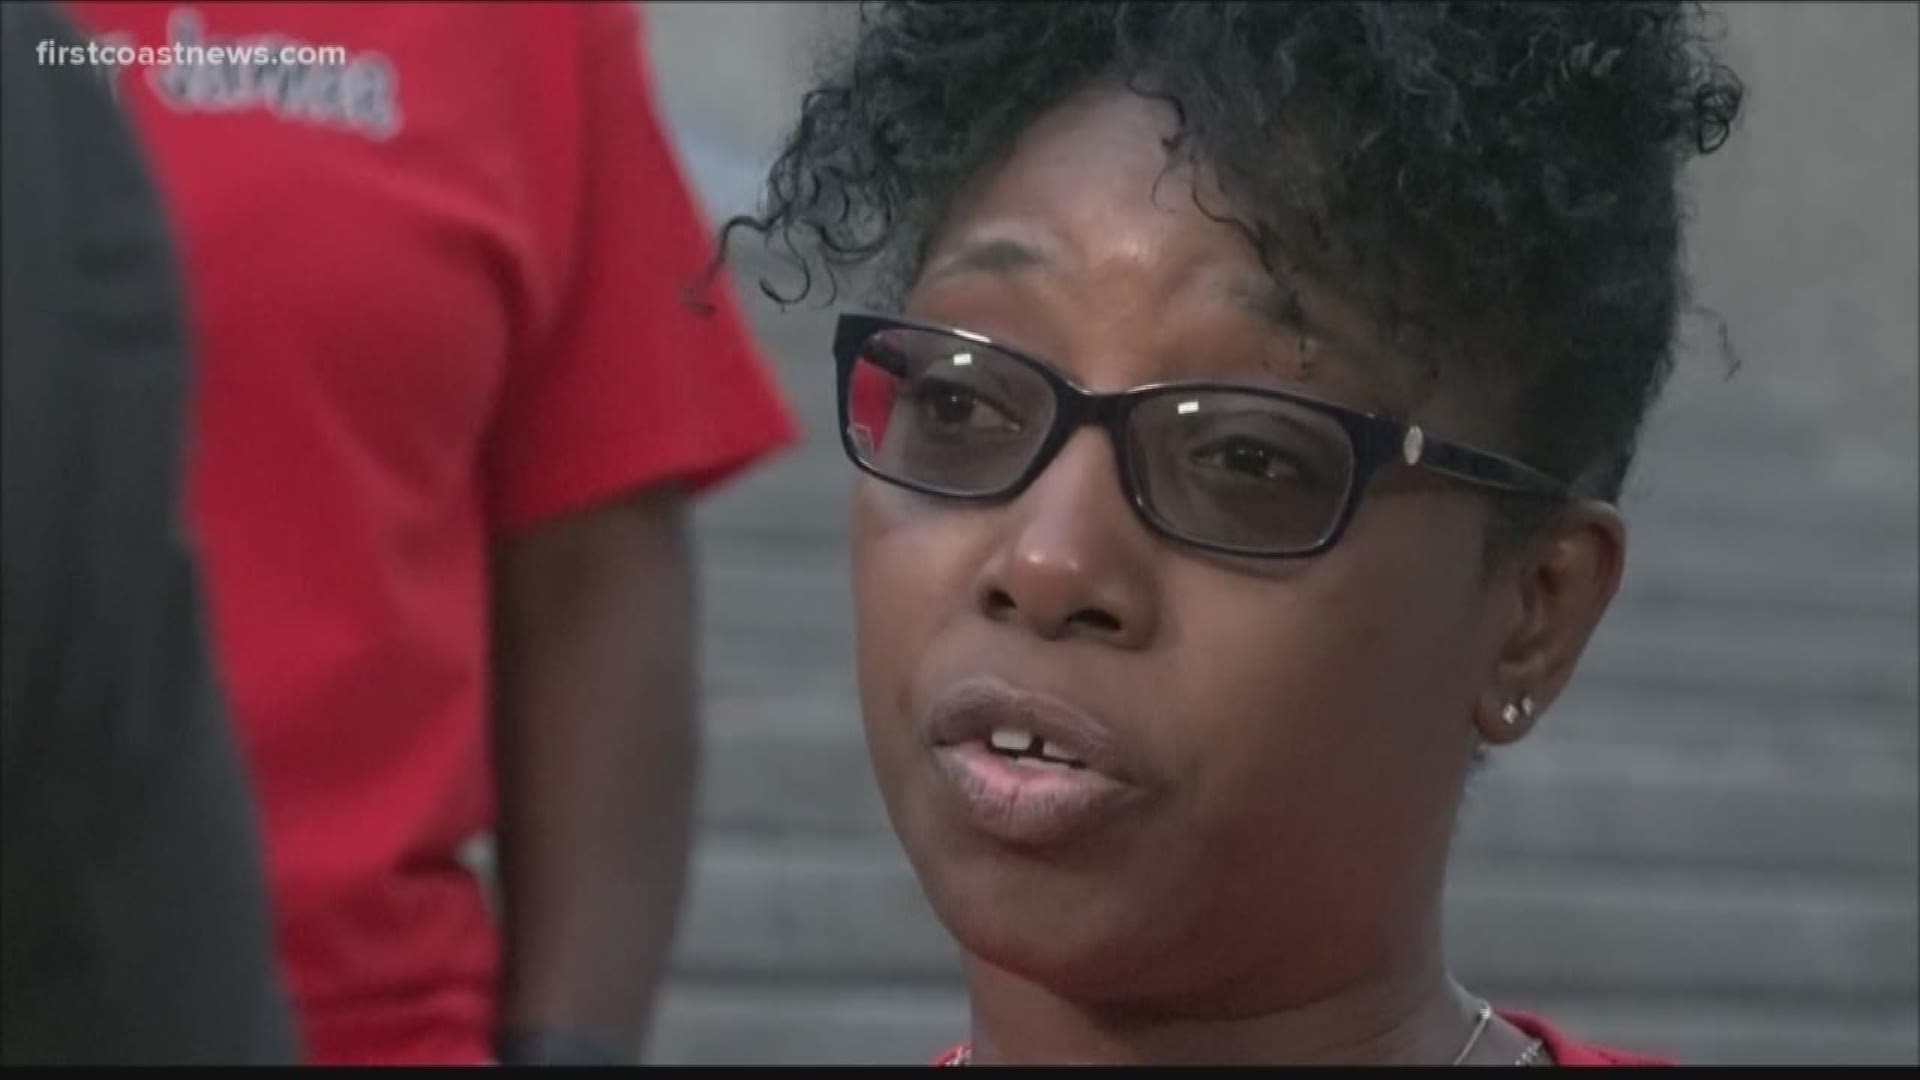 "As a mother, if I could have traded places with my son, I would," Jamee Johnson's mother, Kimberly Austin, told First Coast News.